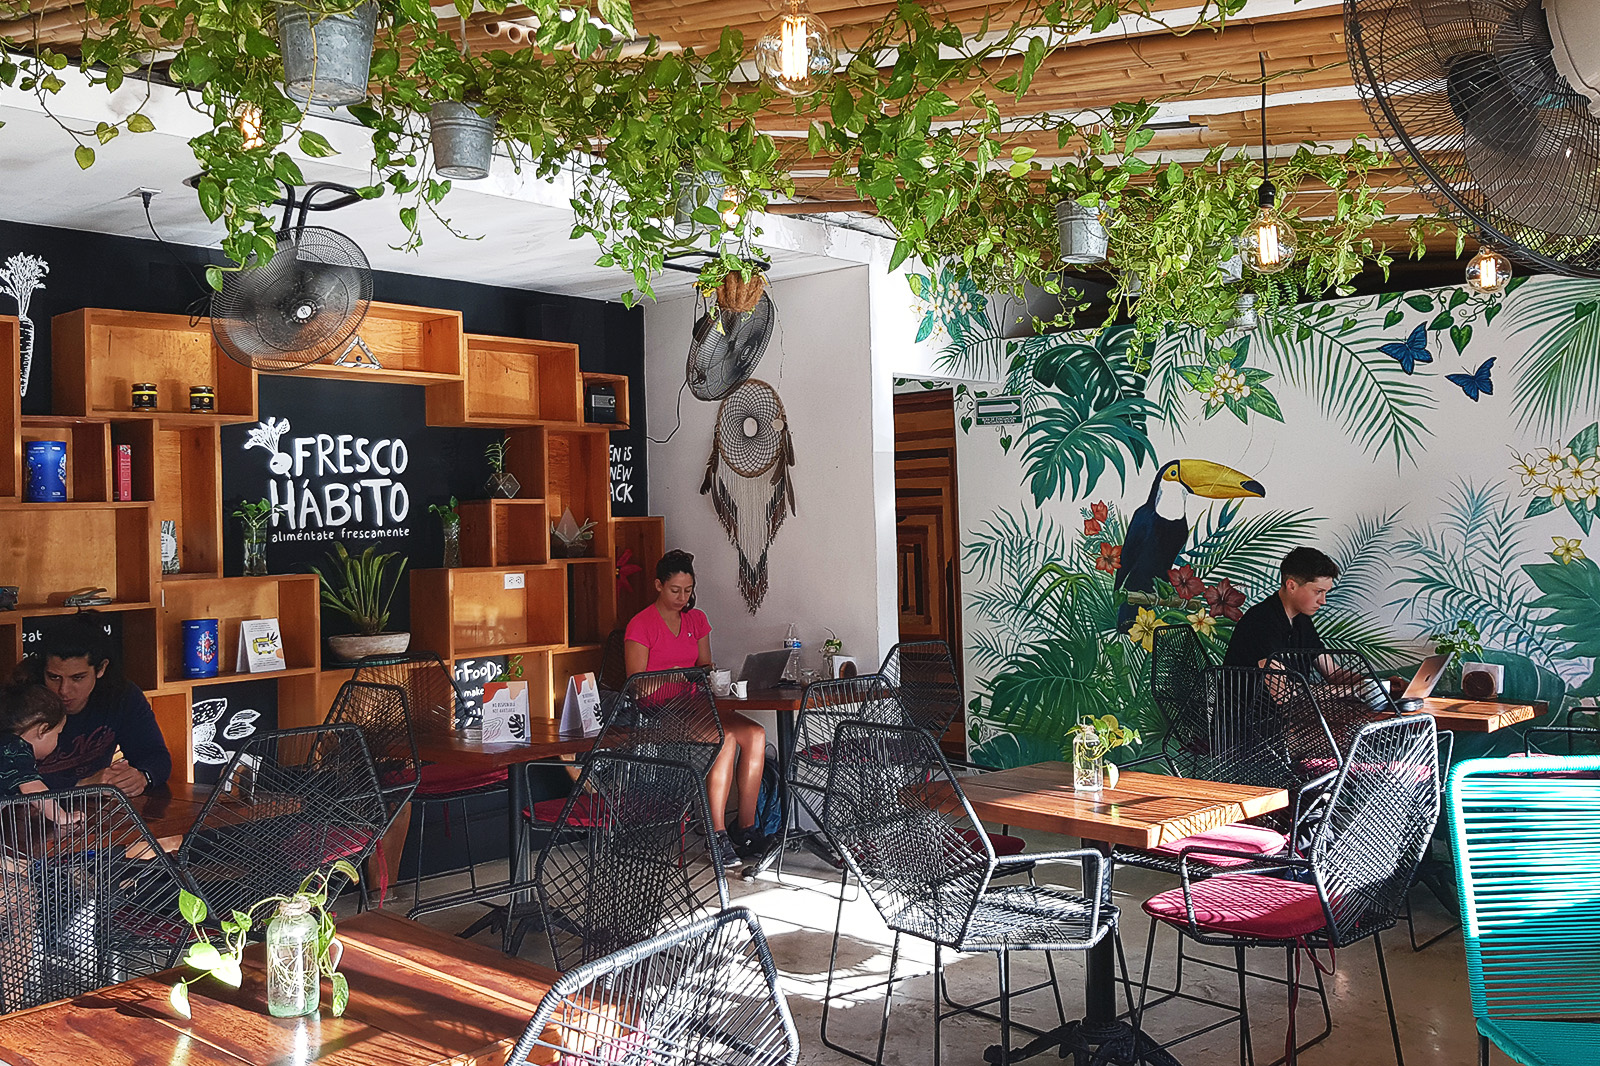 Best Cafes for Strong WiFi & Yummy 'Healthy' Eats in Playa del Carmen featuring Fresco Habito